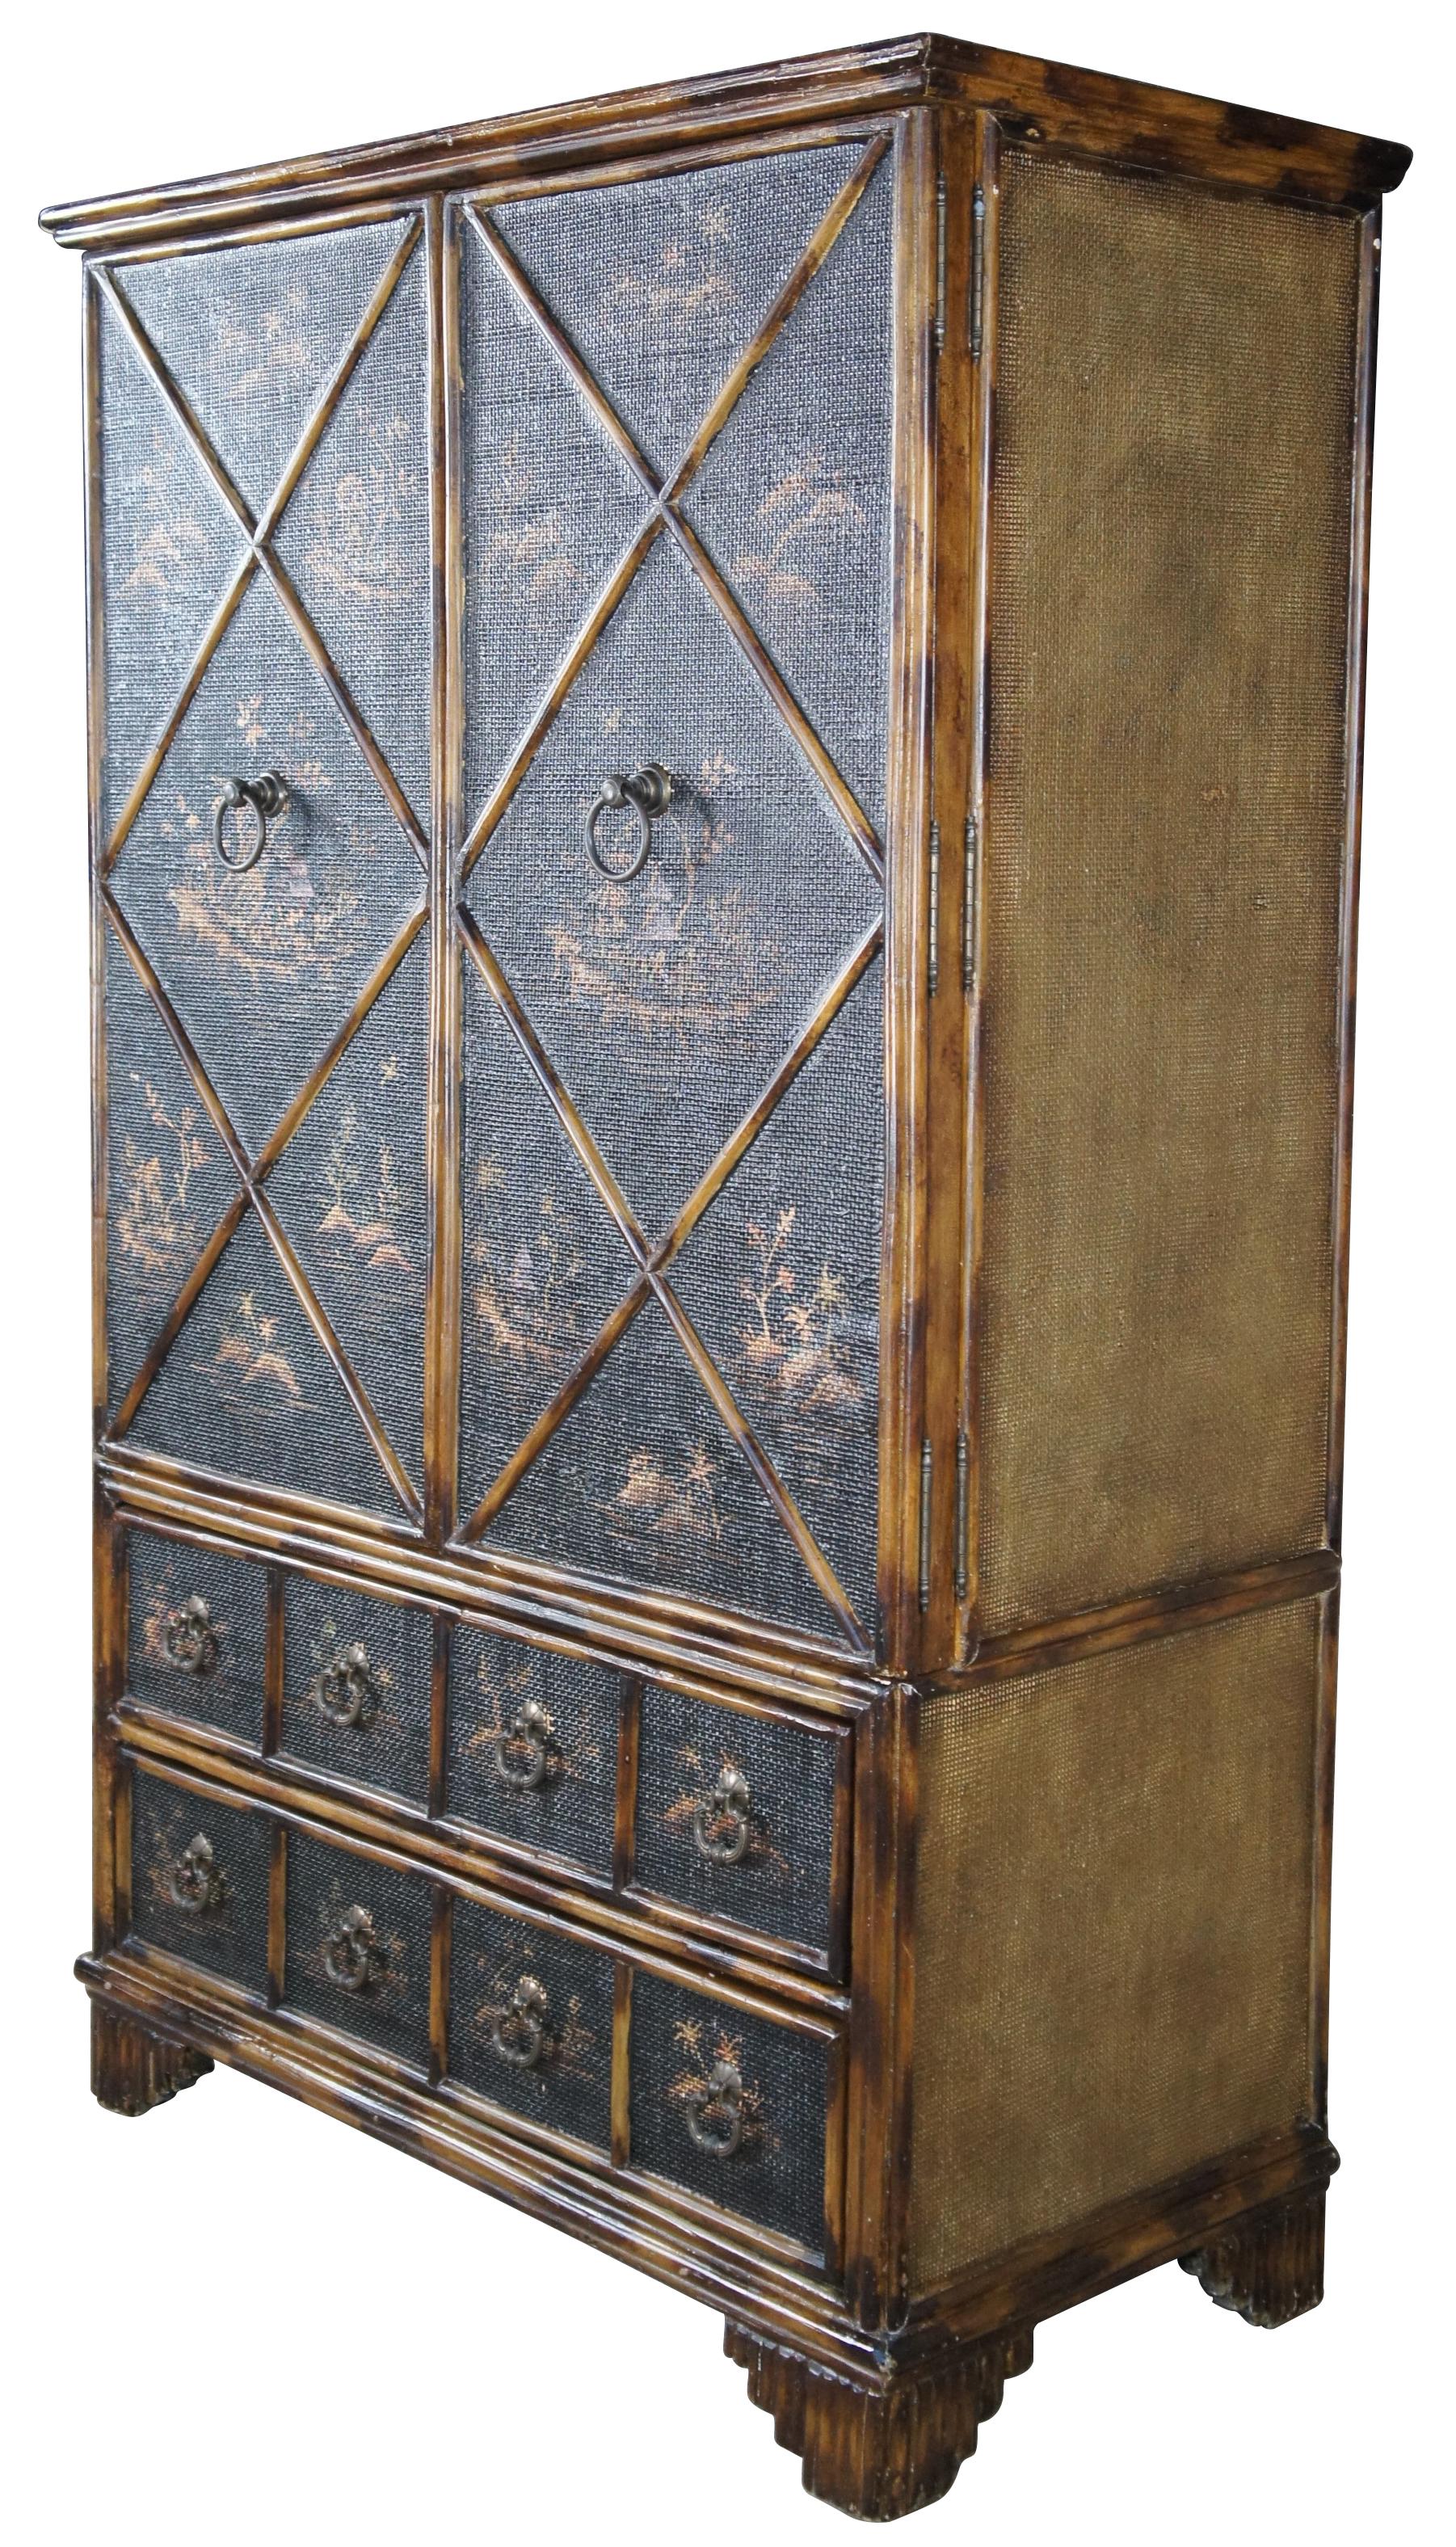 Vintage chinese armoire or mredia cabinet. Made from wood with a chinese chippendale style design featuring scorched faux bamboo and interlaced faux rattan along each side. The cabinet is finished with pagoda landscape scenes along each door. Double